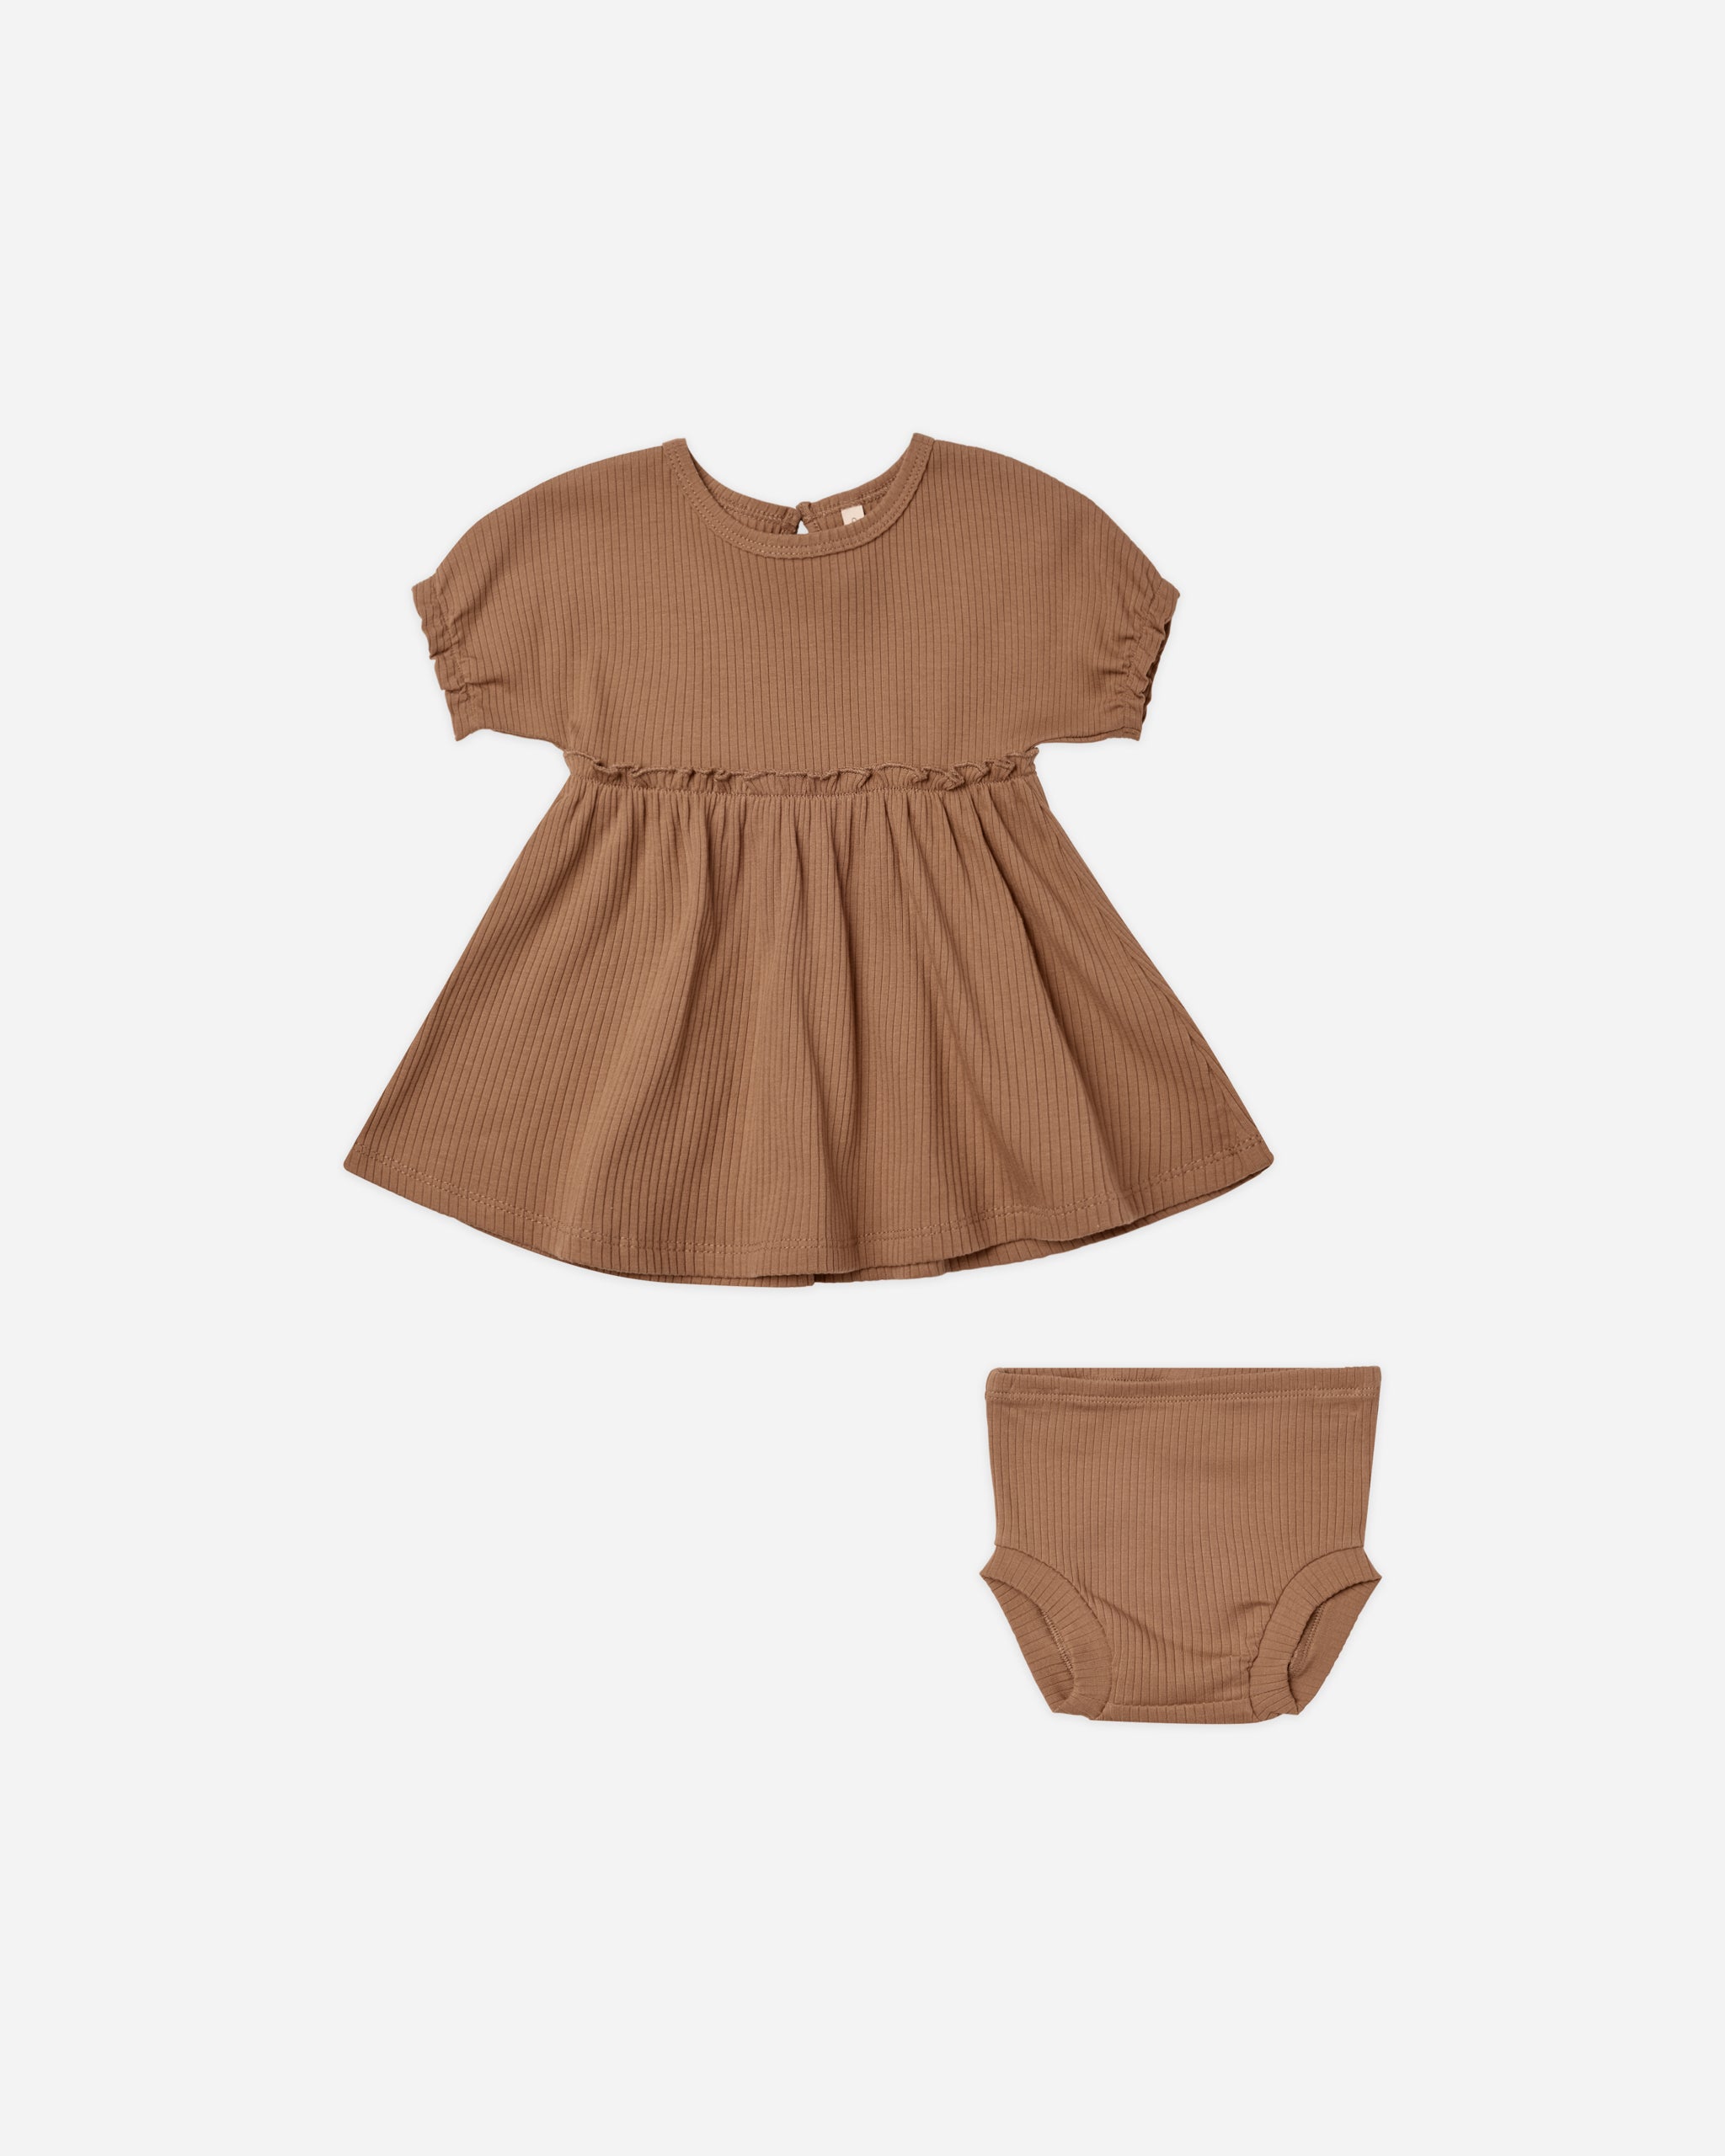 Annie Dress || Cinnamon - Rylee + Cru | Kids Clothes | Trendy Baby Clothes | Modern Infant Outfits |